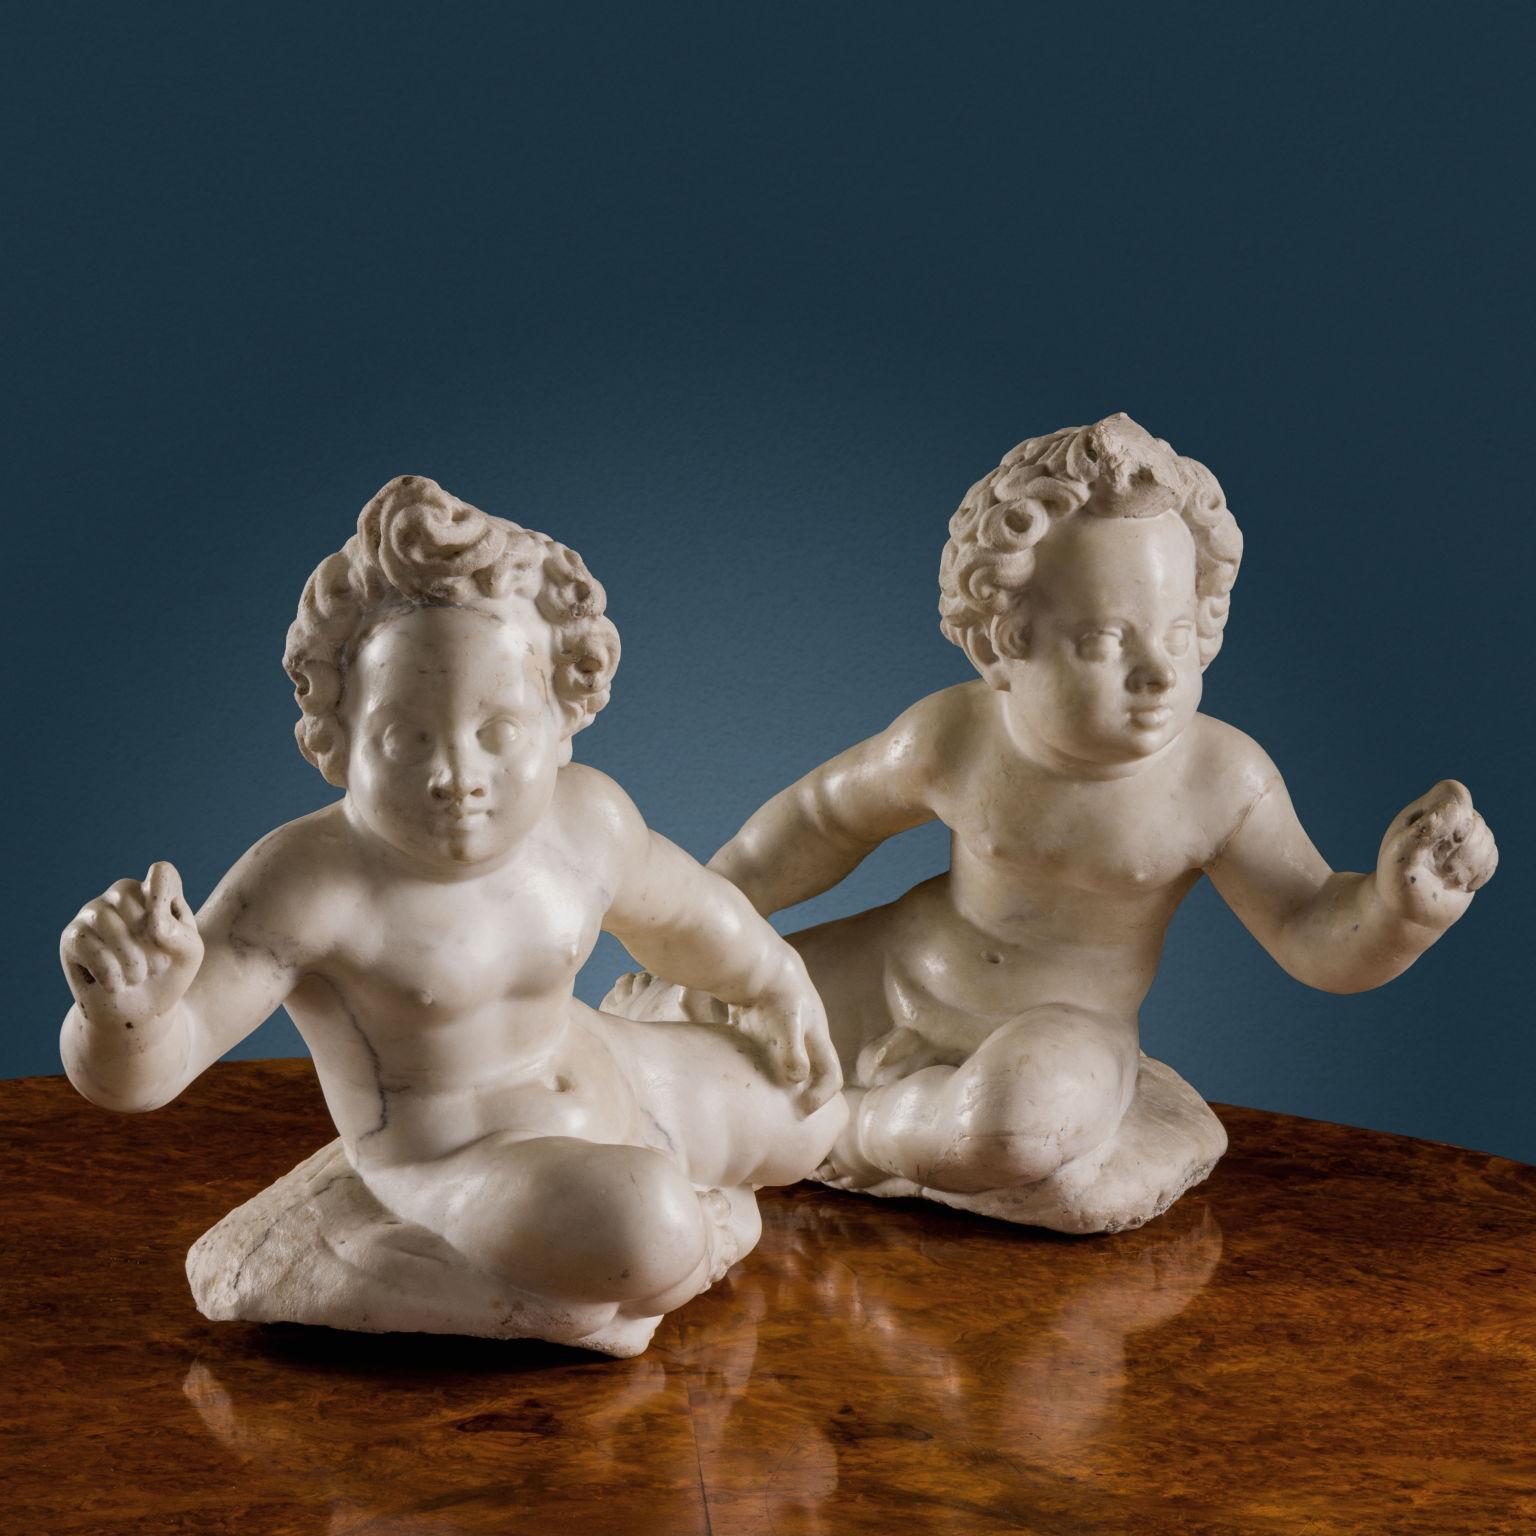 Pair of Carrara marble Putti, depicted in a mirror-image position to each other: softly reclining, the torso advanced and slightly off to the side, one arm resting on the thigh, while the opposite arm is raised, the closed hand gripping an item that